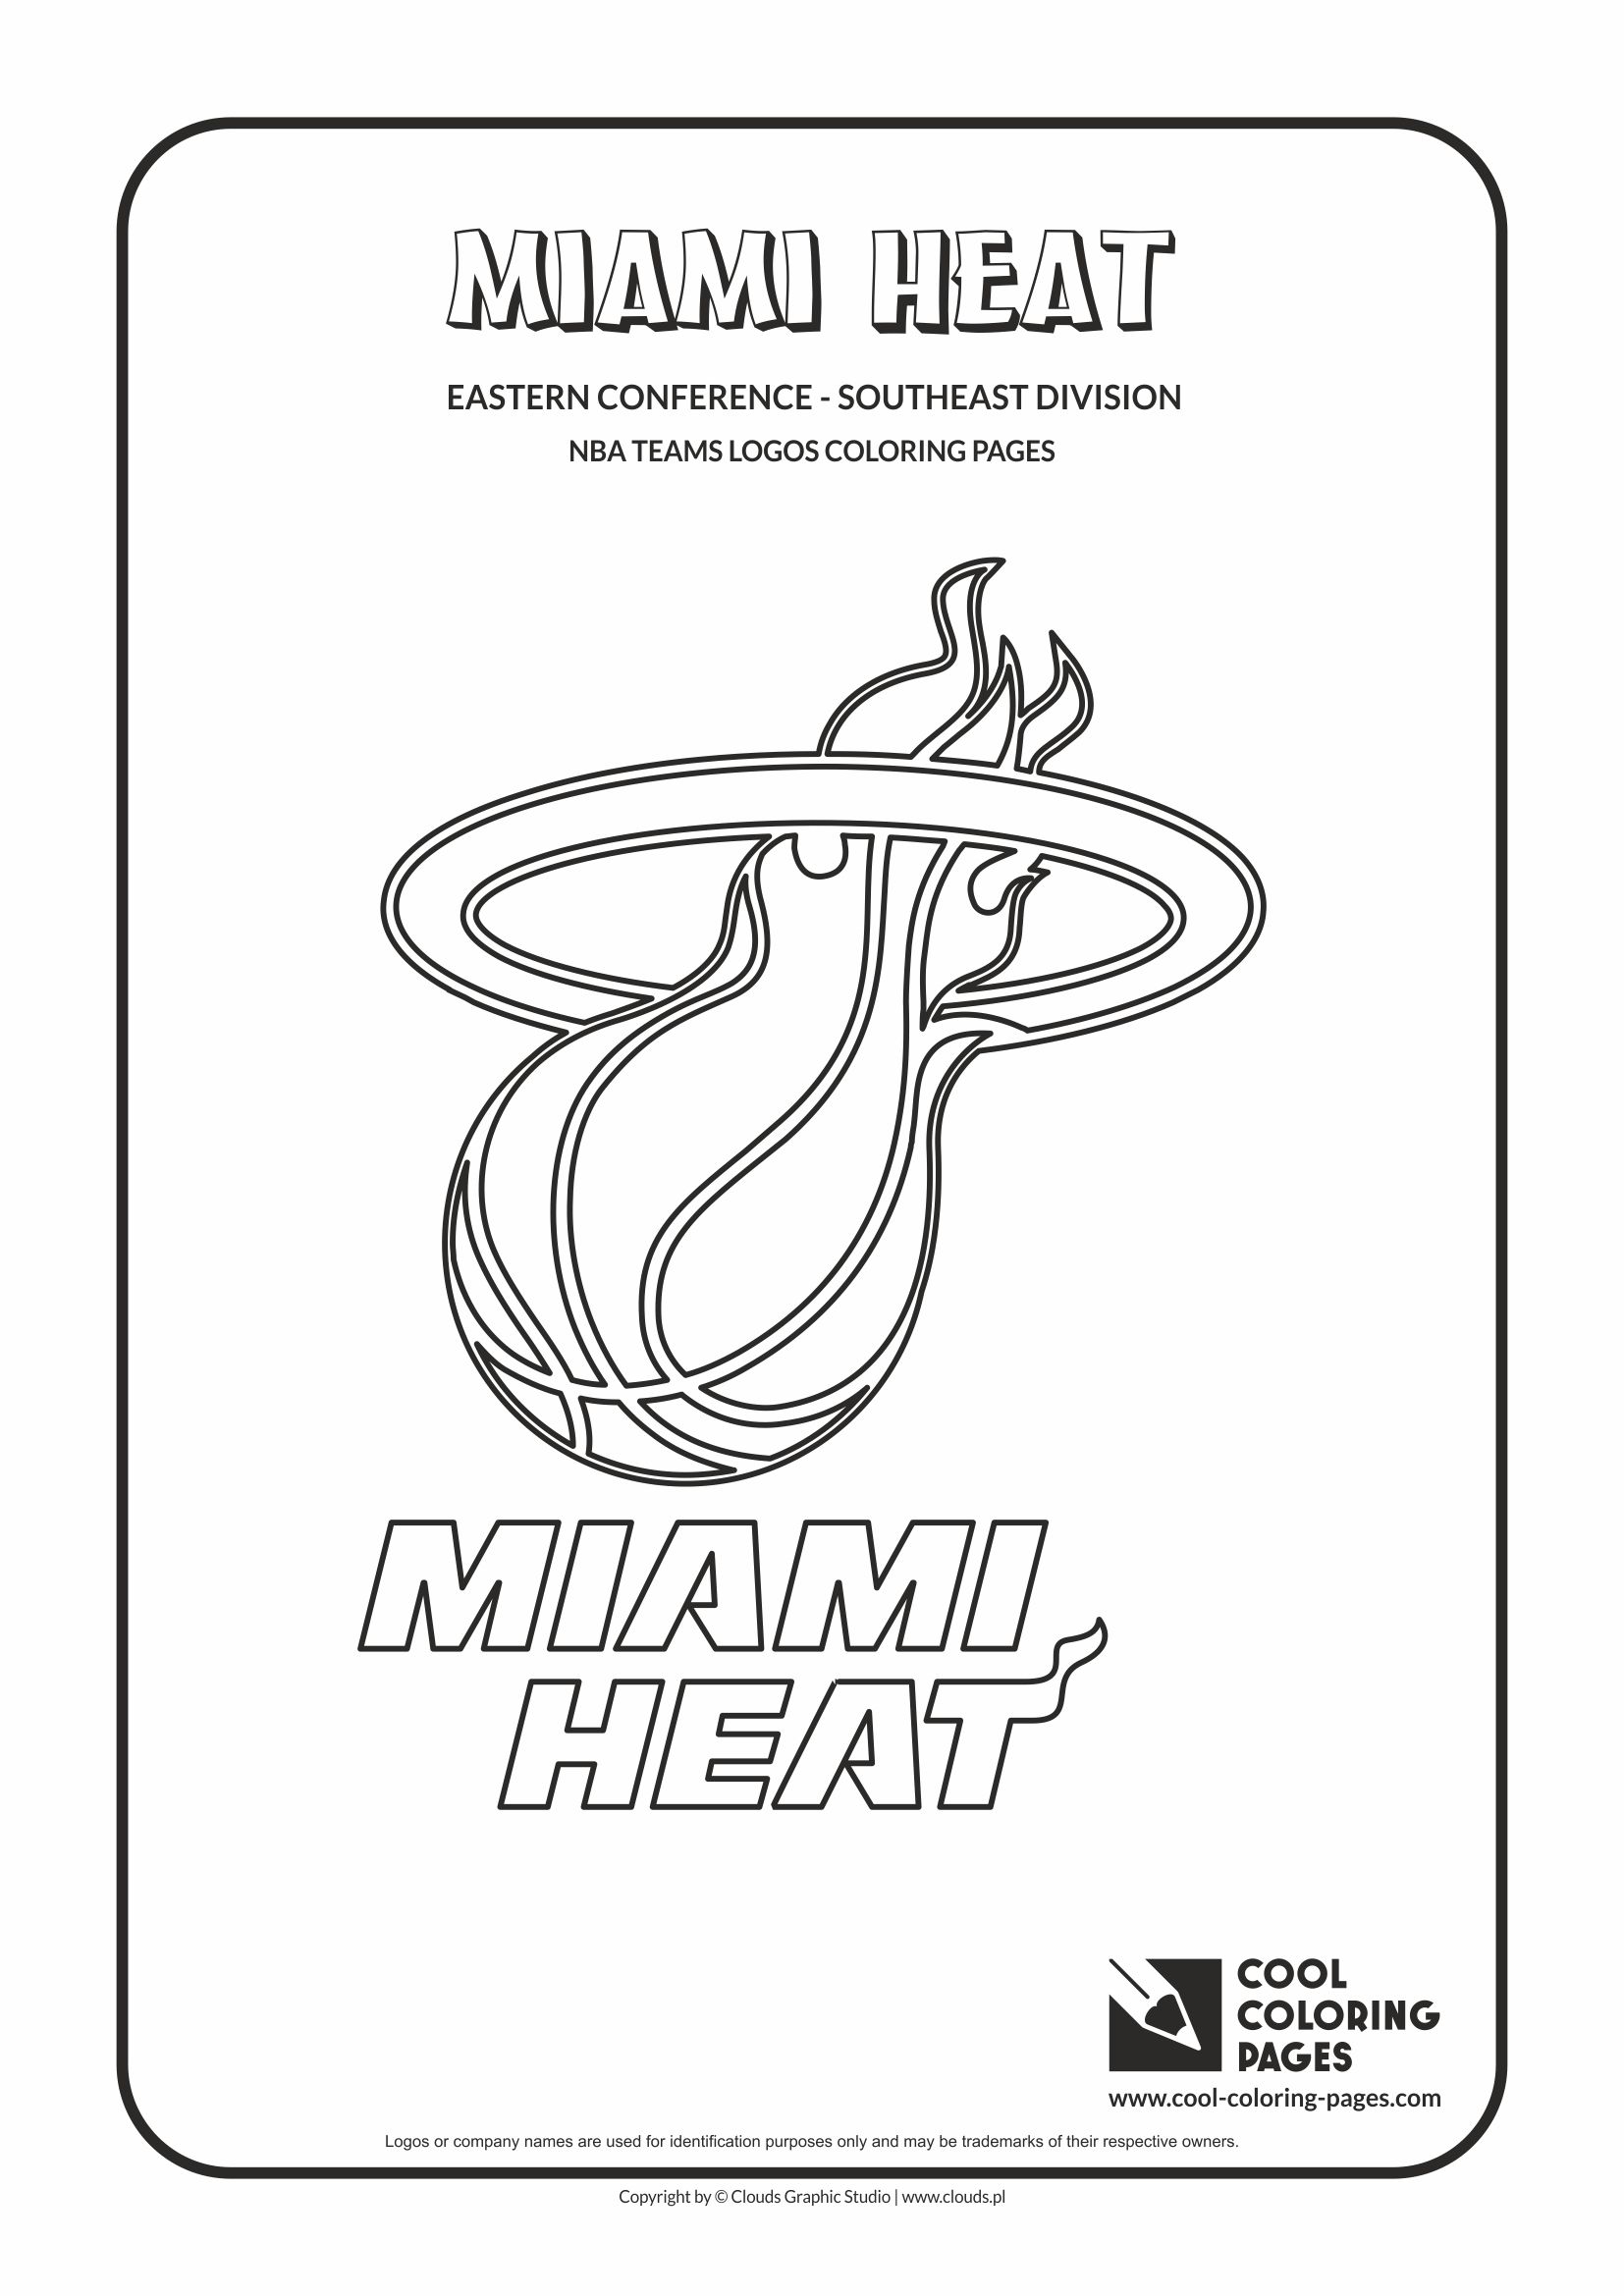 Cool coloring pages nba teams logos coloring pages